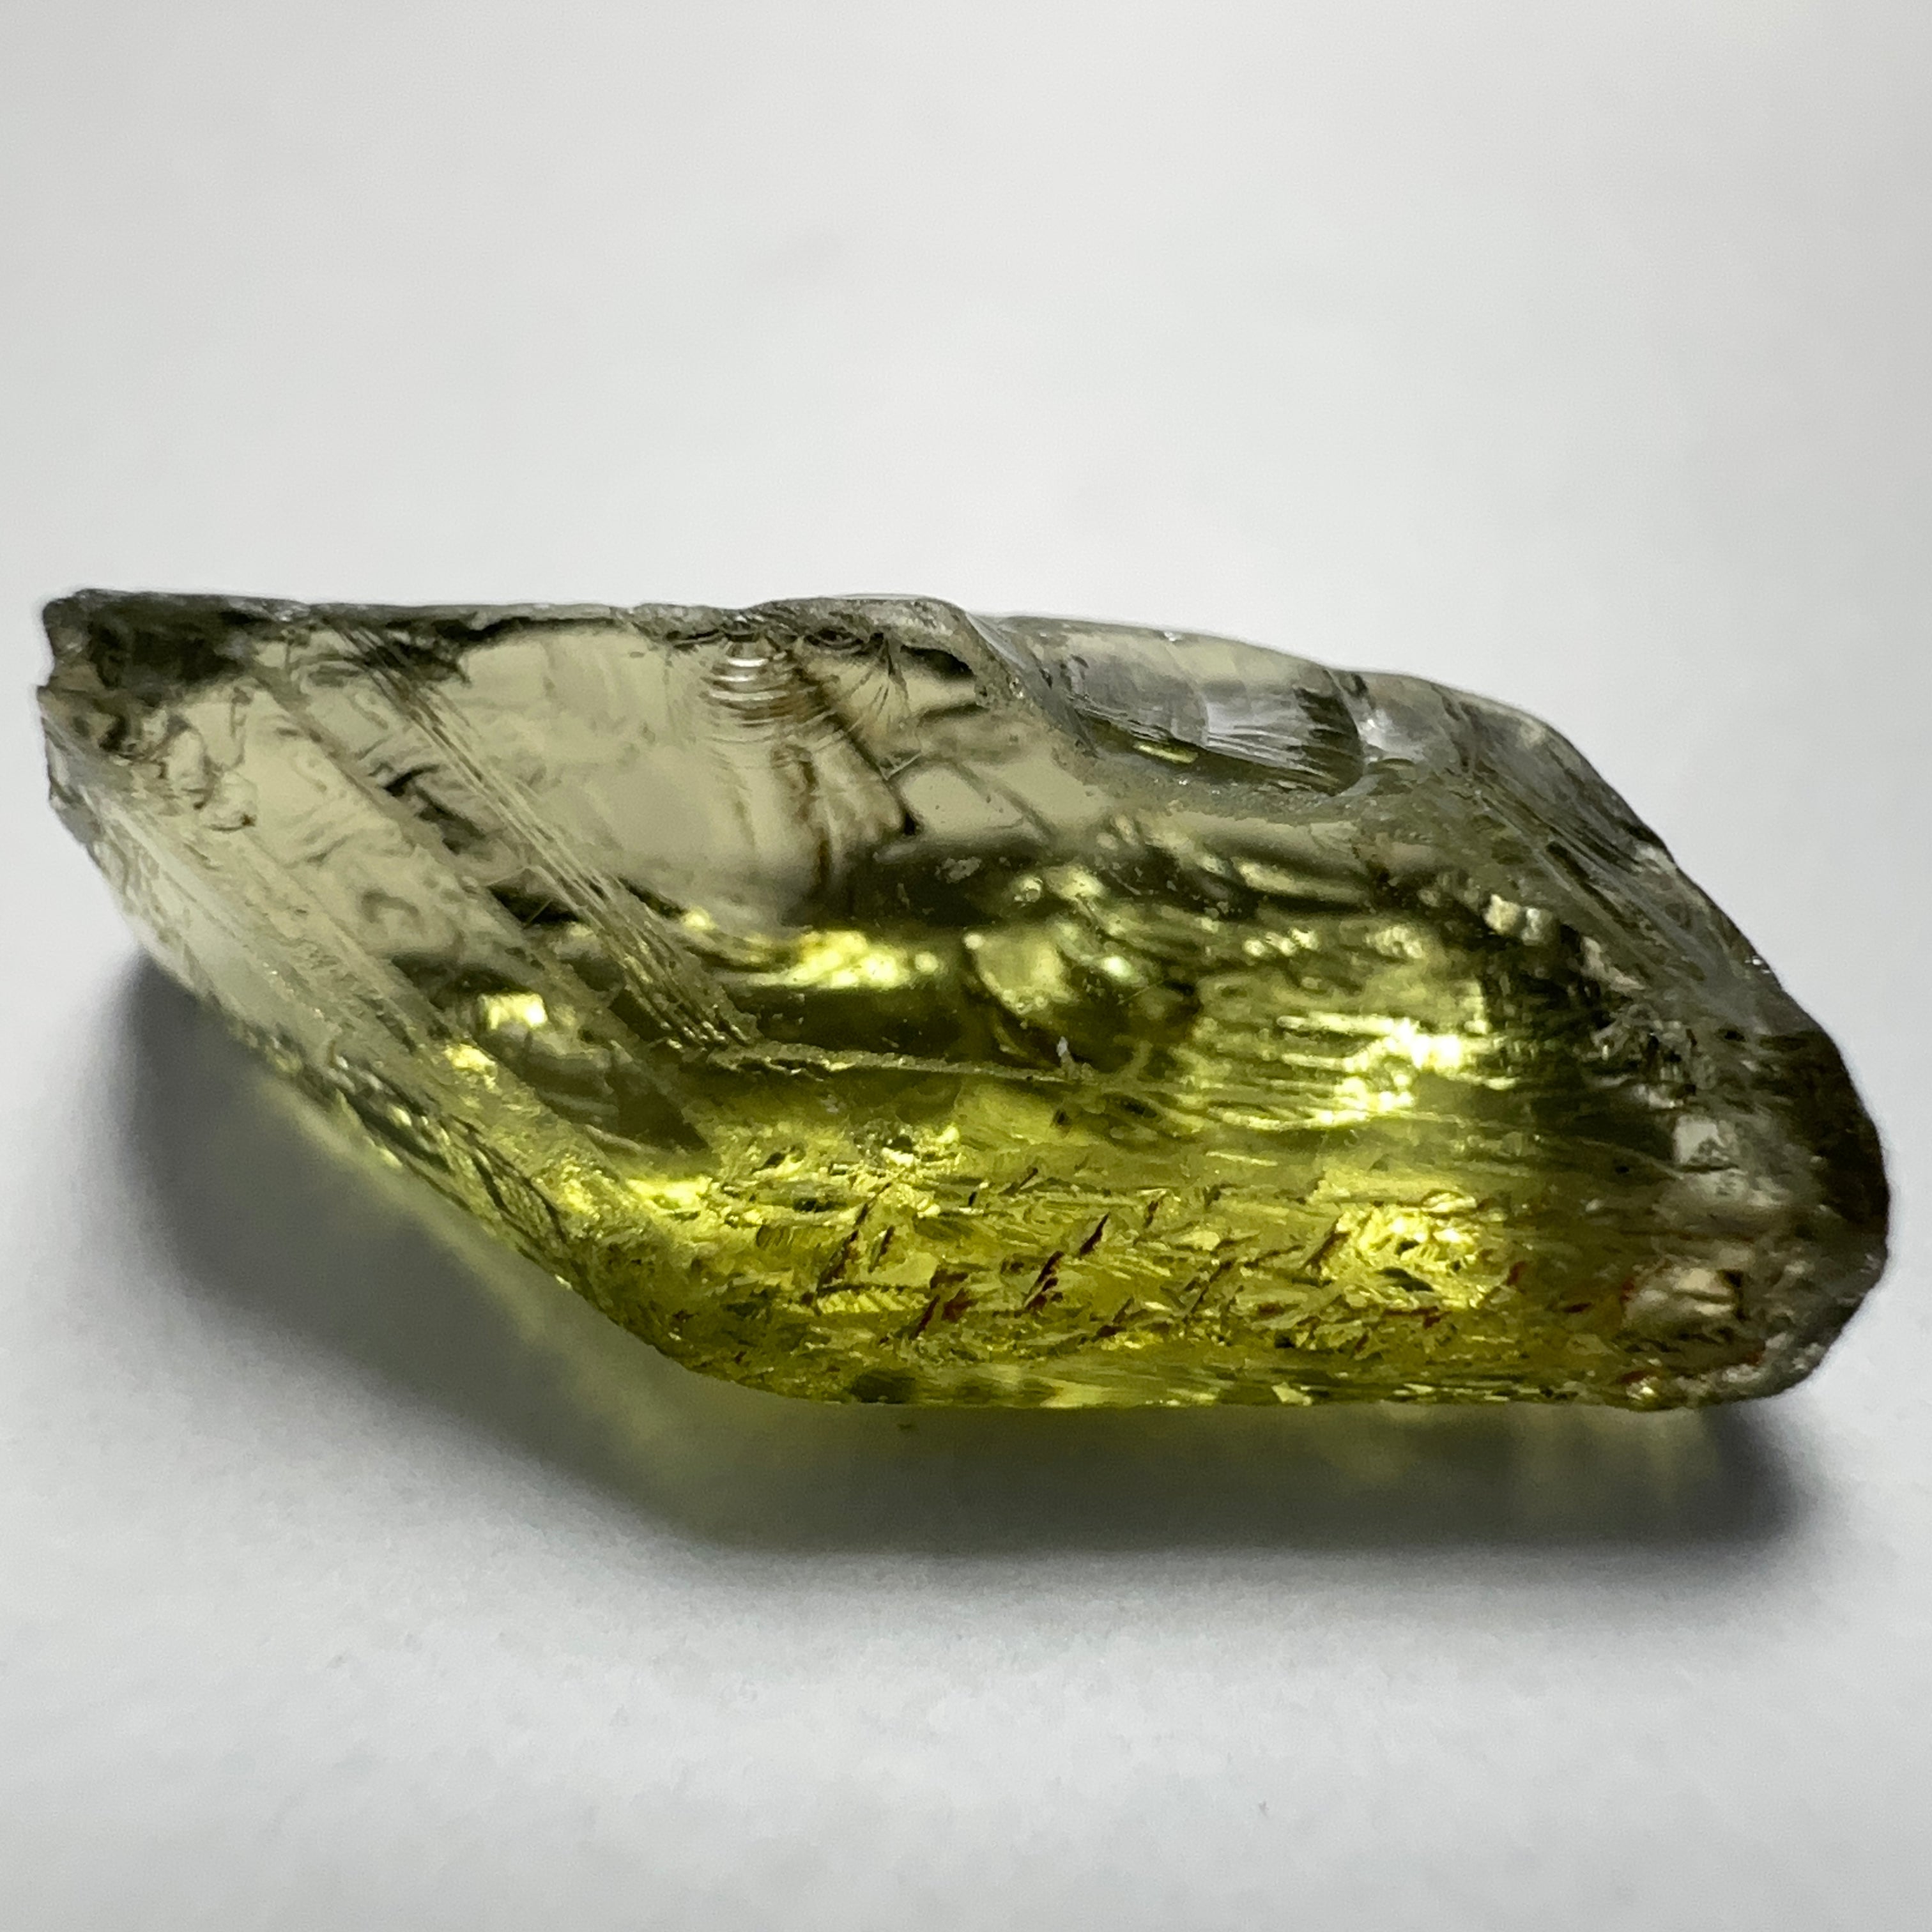 5.37ct Mozambique Tourmaline, VVS-IF, Untreated Unheated.